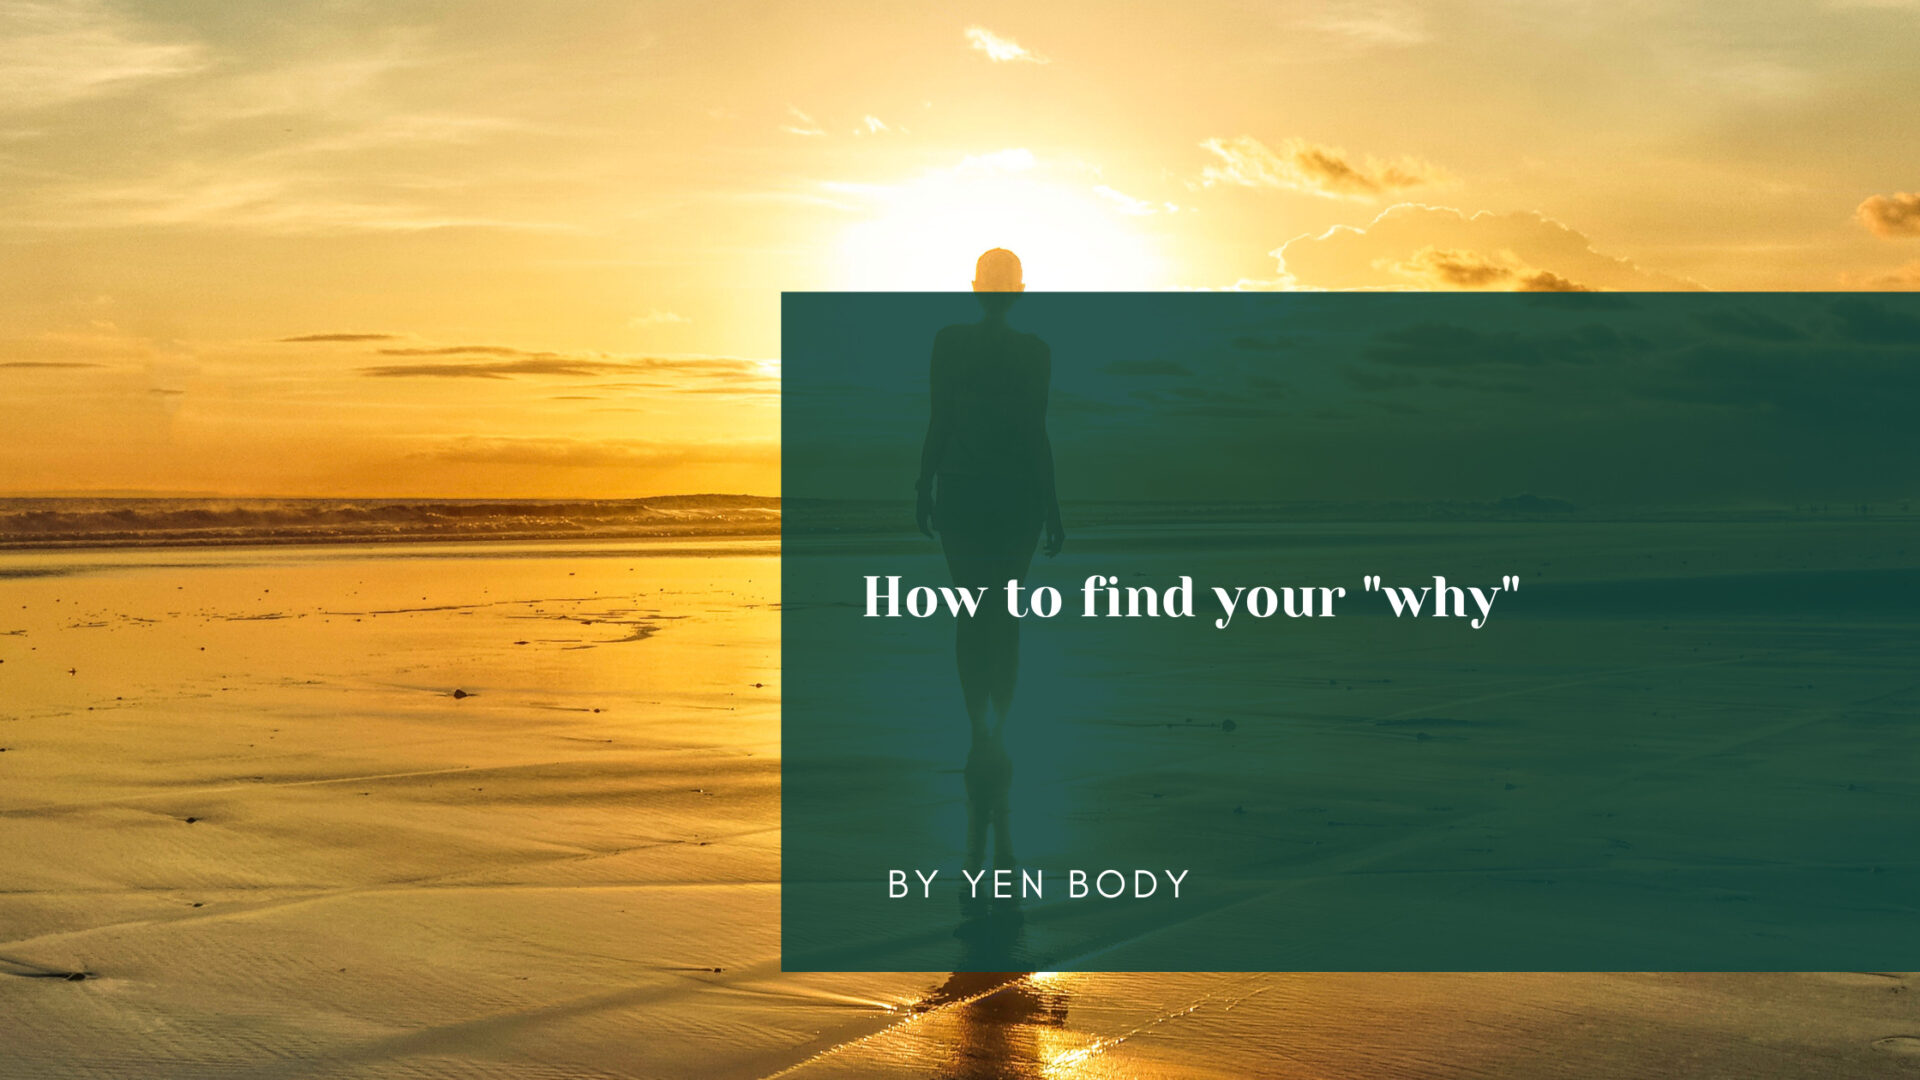 How to find your "why"